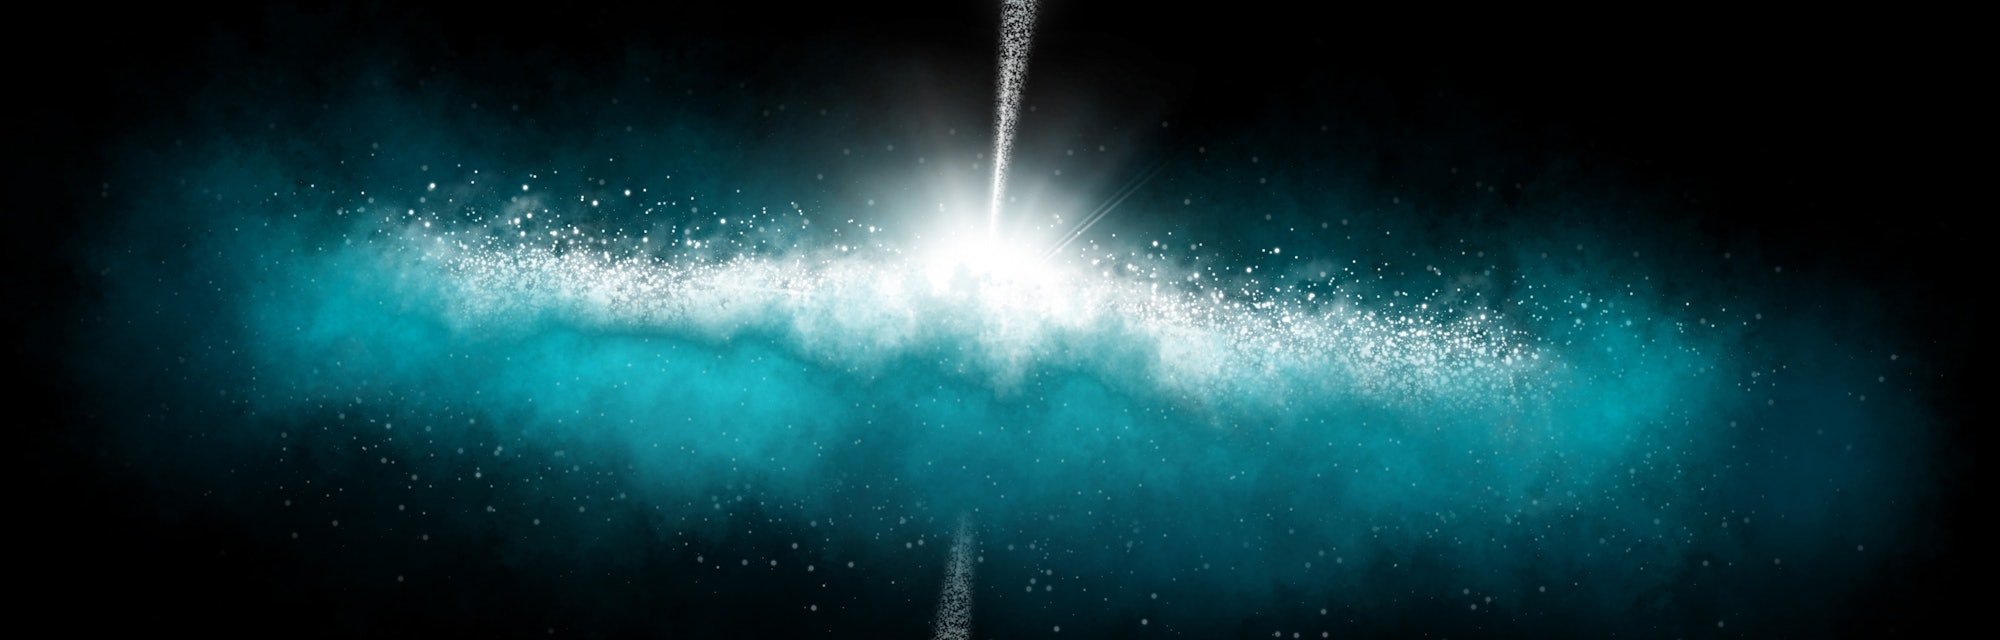 Galaxy with jets. Black hole in center of galaxy. Interstellar background. Space illustration.